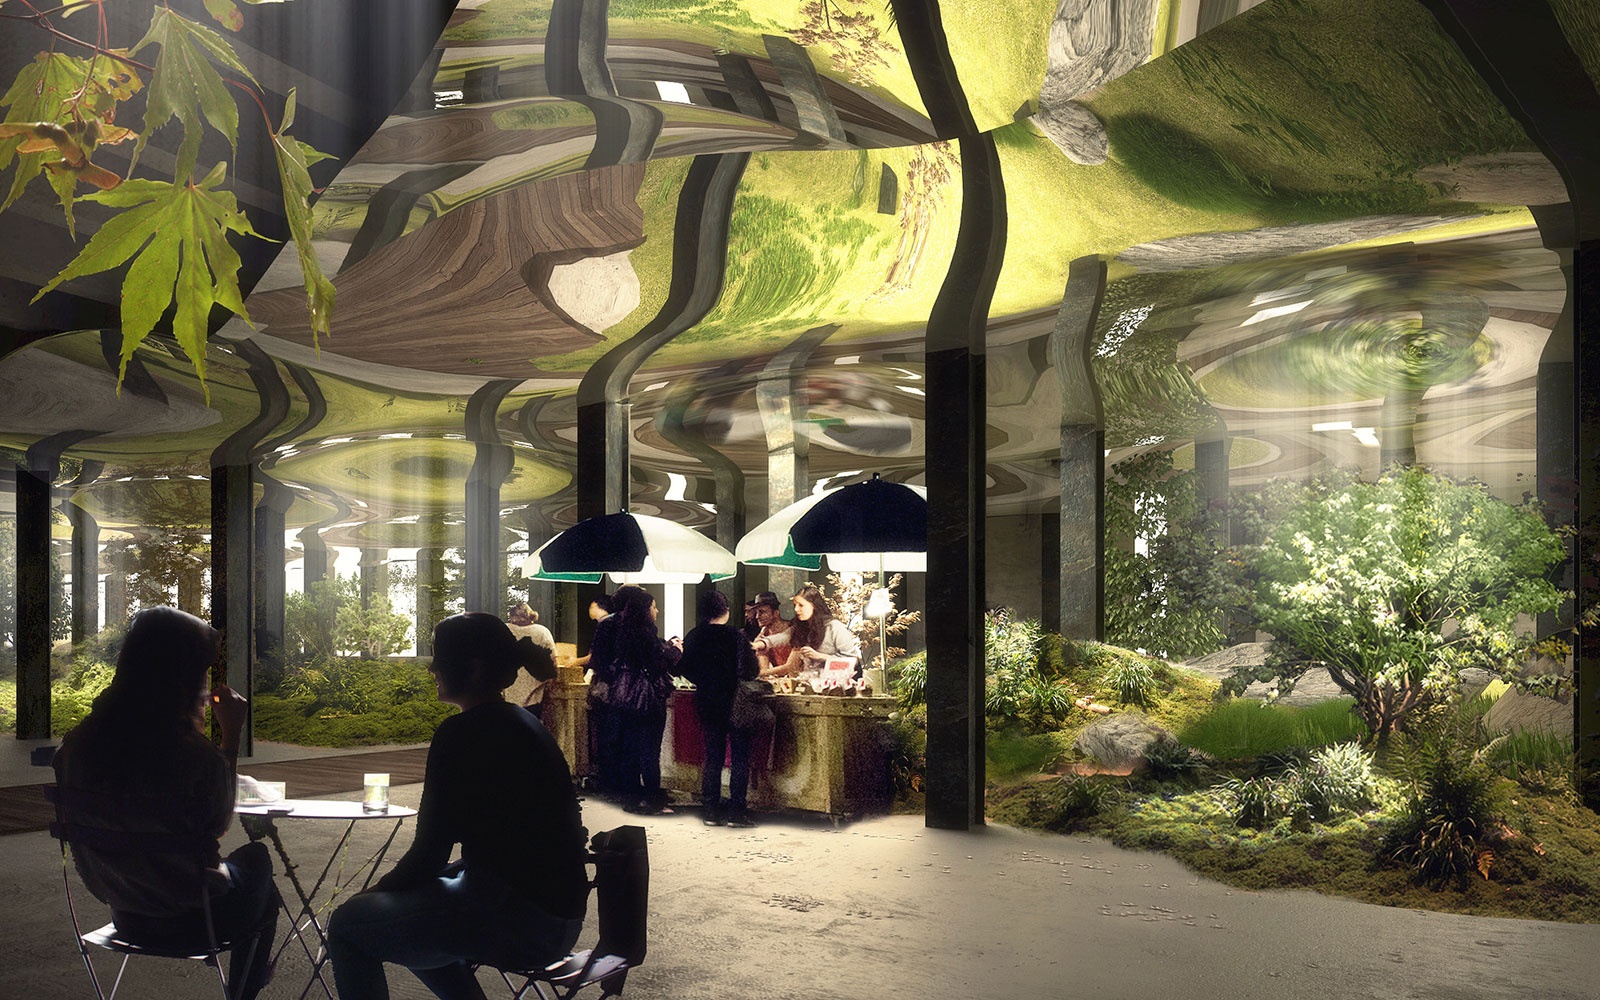 This Weekend, Get a Peek at New York's Underground Park of the Future